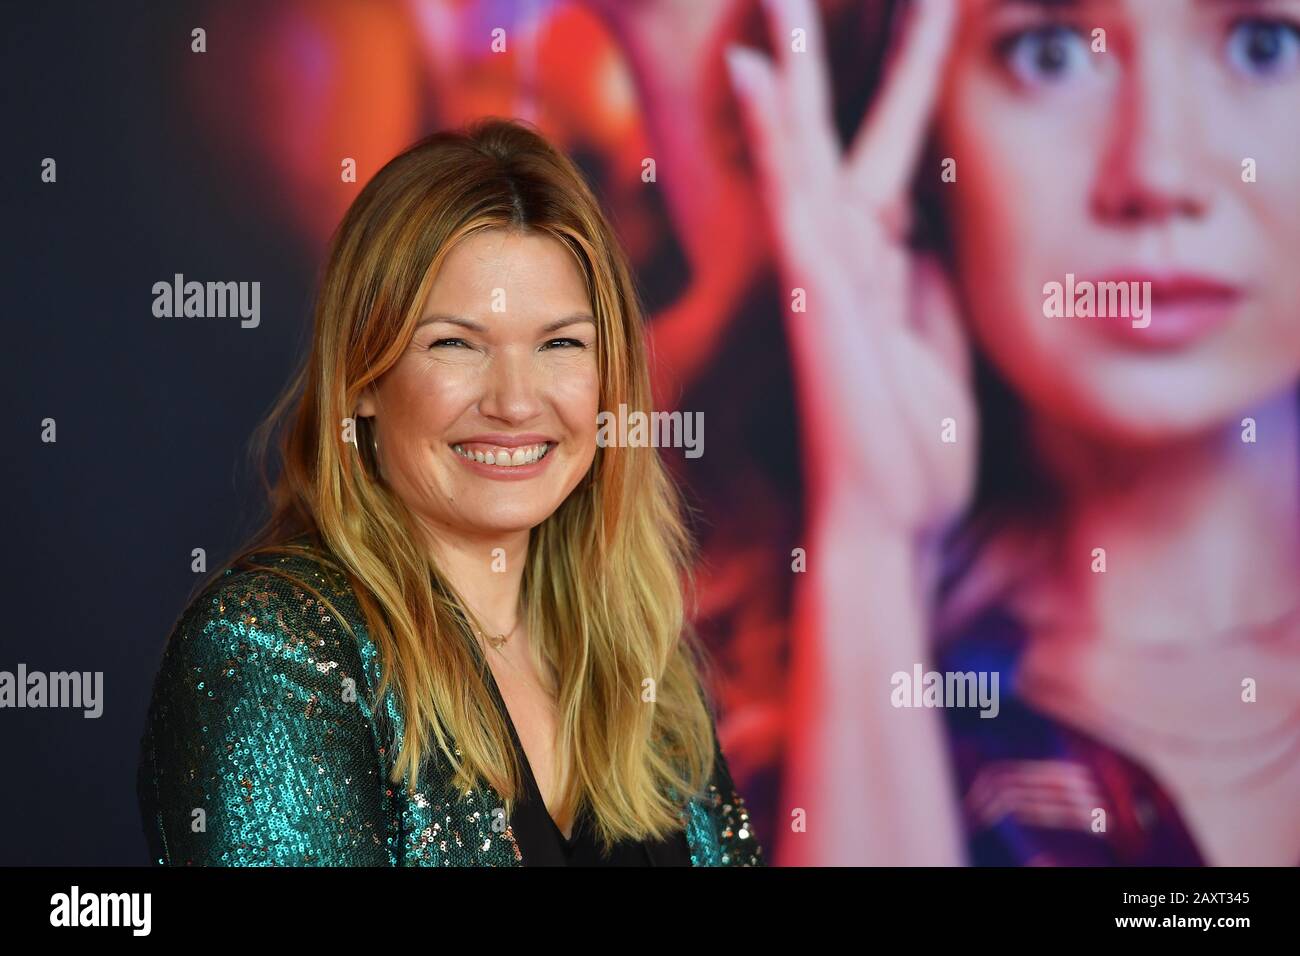 Sports presenter Jessica Kastrop, single image, cut single motif, portrait, portrait, portrait red carpet, red carpet, arrival. Film premiere, cinema premiere NIGHTLIFE on February 12th, 2020 at Mathaeser Kino in Muenchen, | usage worldwide Stock Photo